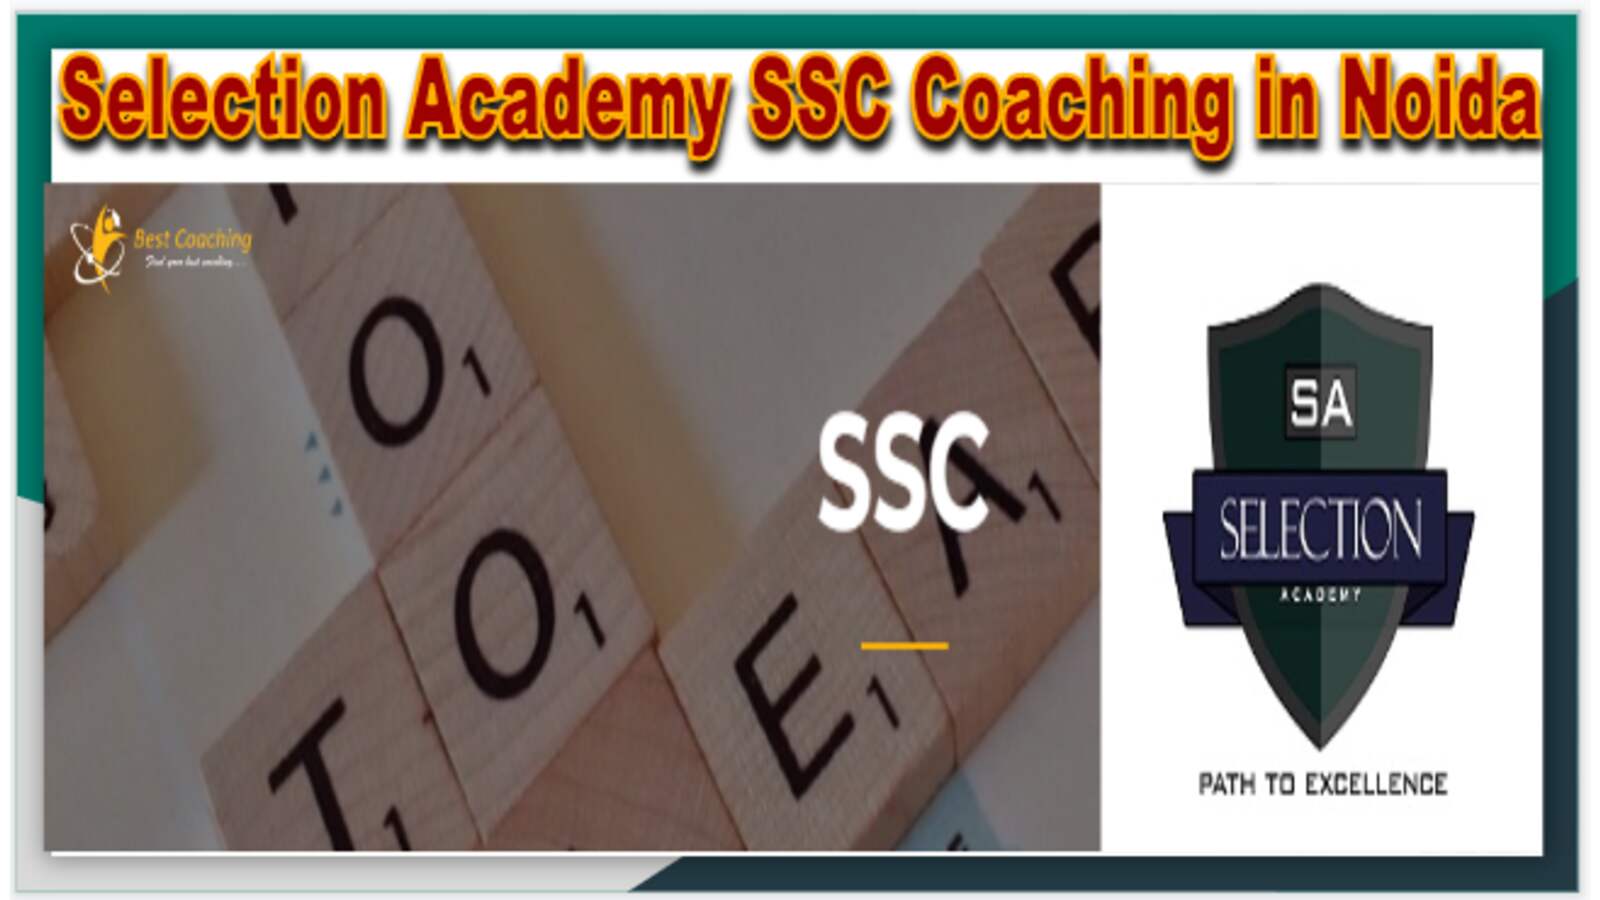 Selection Academy SSC Coaching in Noida